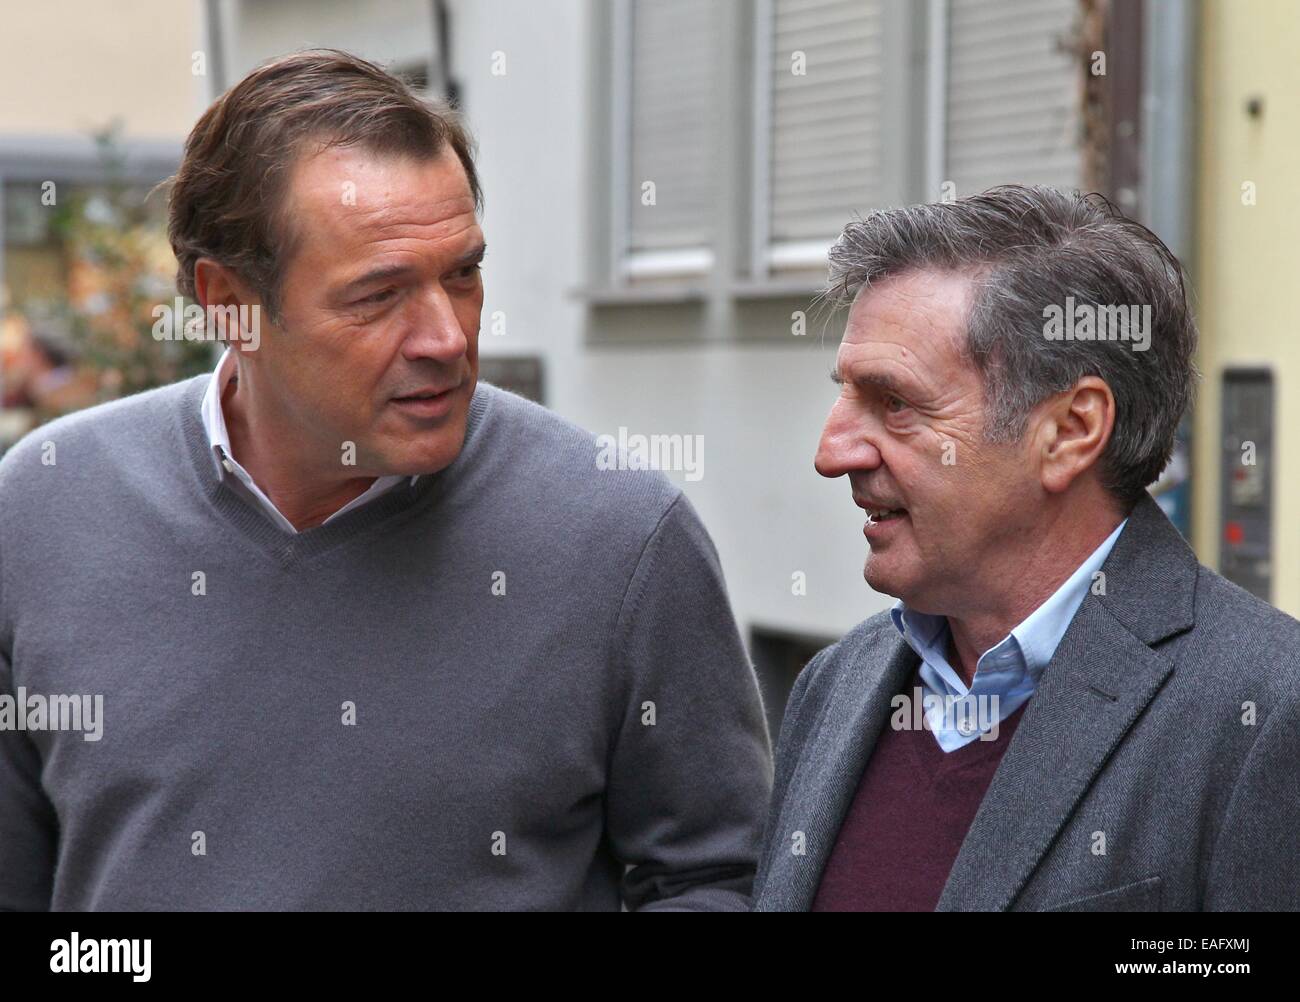 French actor Daniel Auteuil (R) and German actor Sebastian Koch pose on the set of the film 'Bamberski-Der Fall Kalinka' (lit. the Kalinka case) in Lindau, Germany, 14 November 2014. The French and German justice system have been dealing with the Kalinka case since three decades. The film focusses on the death of the 14-year old girl and her father's actions of vigilantism. Photo: Karl-Josef Hildenbrand/dpa Stock Photo